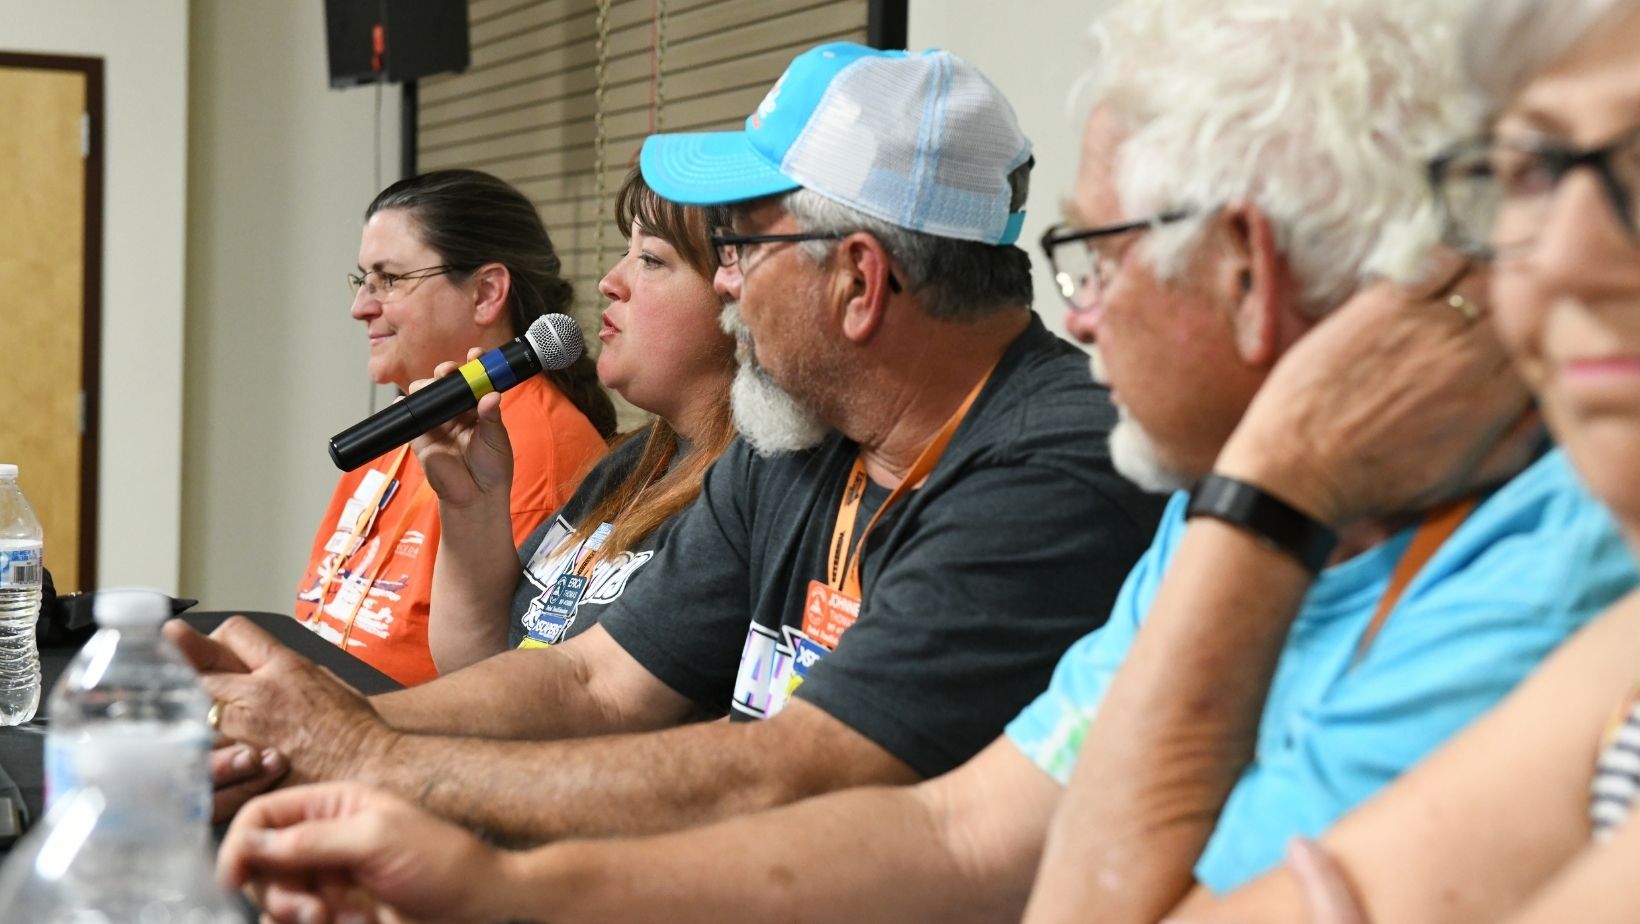 Members answer questions during an Escapade seminar on full-time RVing.